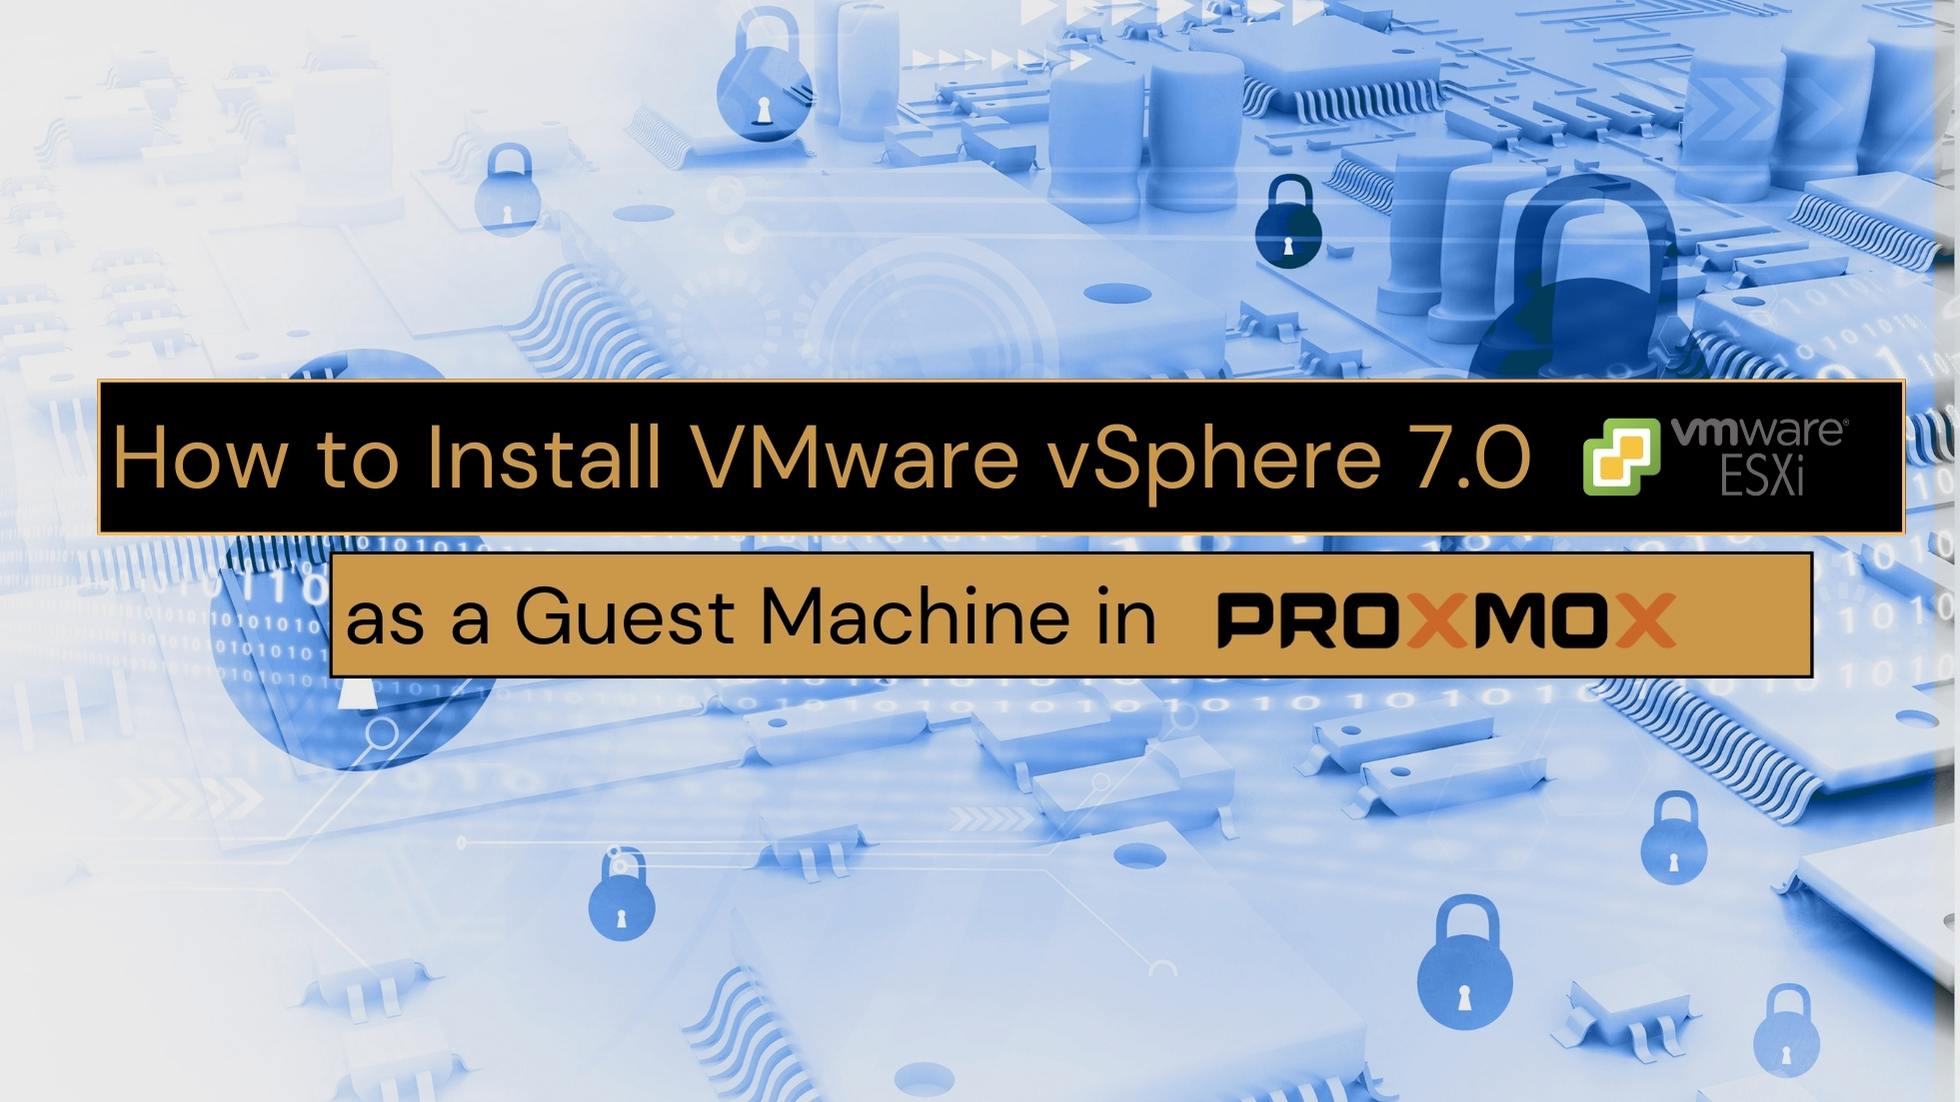 How to Install VMware vSphere 7.0 as a Guest Machine in Proxmox